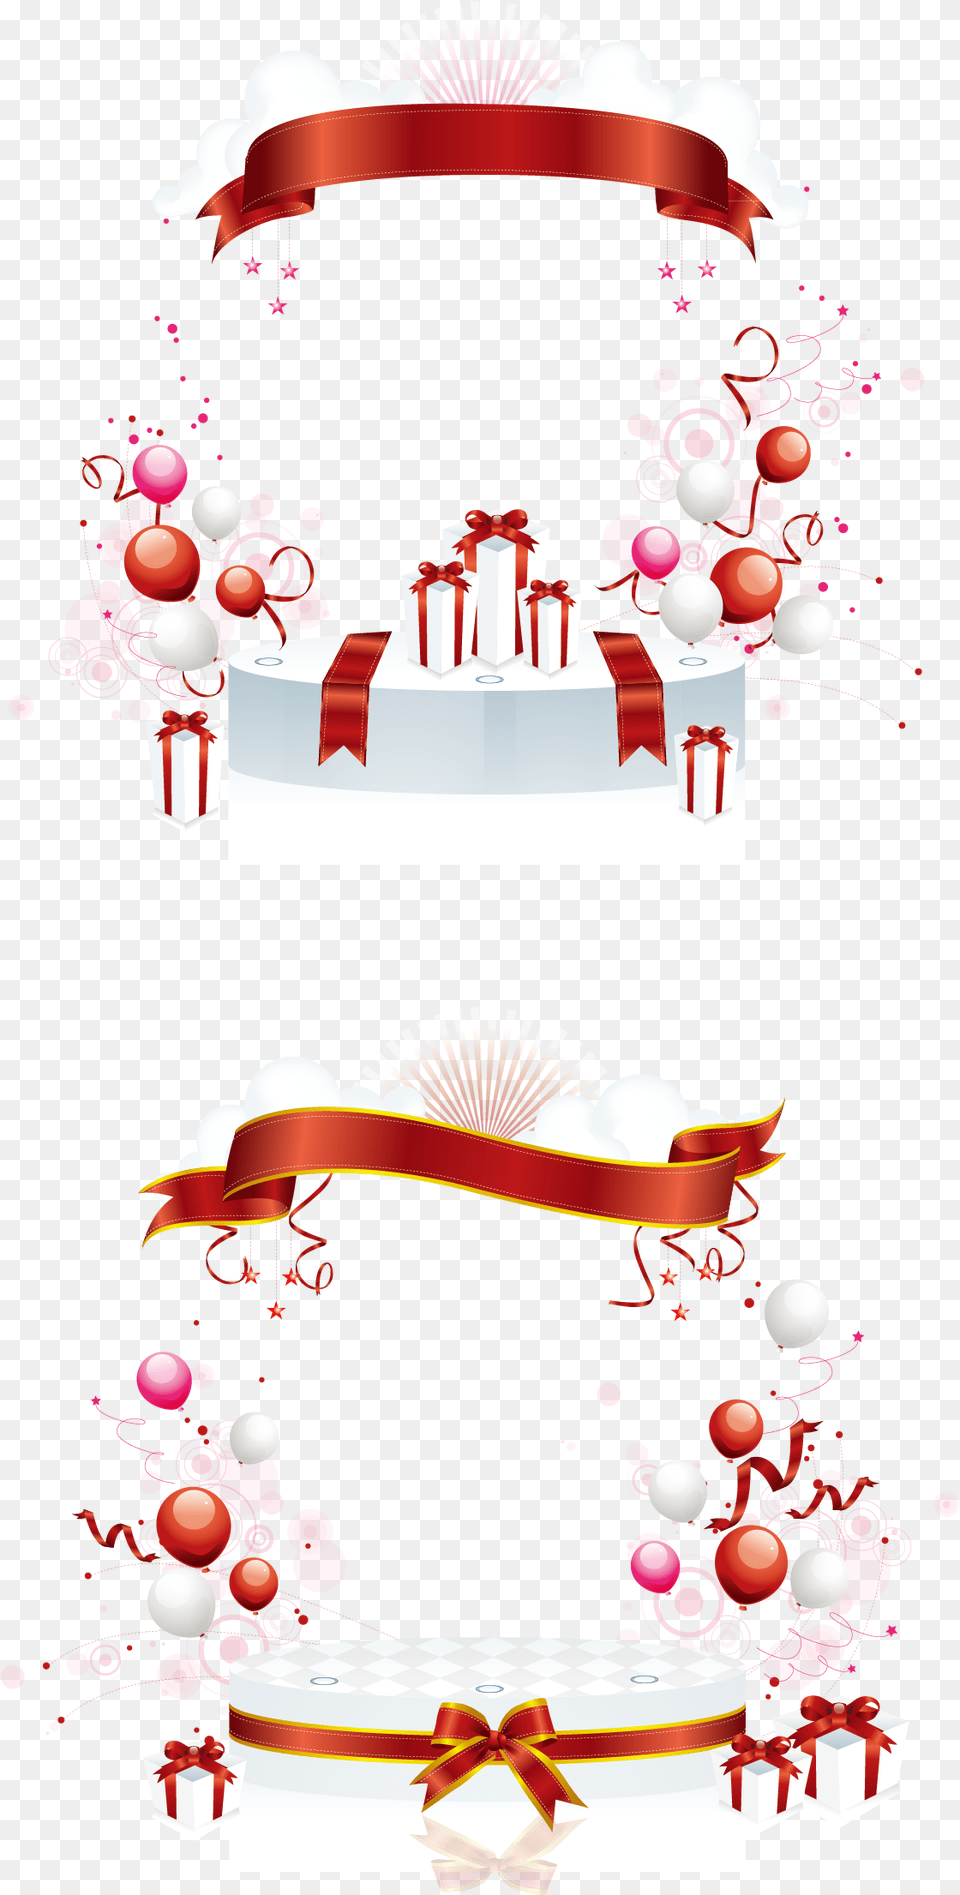 Download Gallery Of Wedding Clipart Unique Birthday Card Invitation Clipart, People, Person, Cake, Dessert Png Image